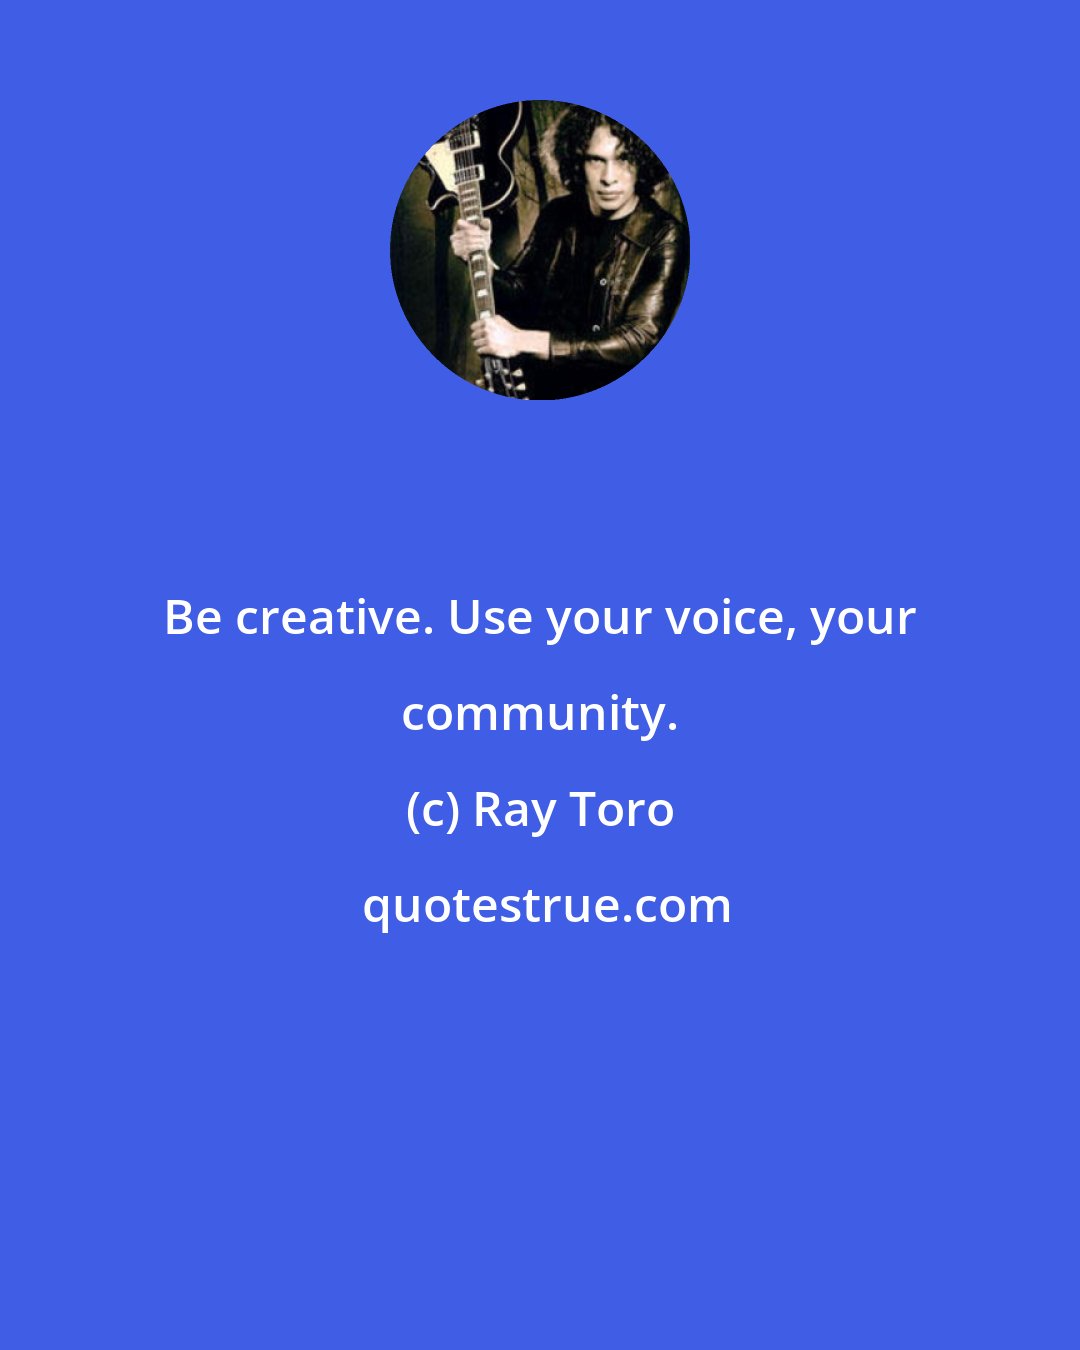 Ray Toro: Be creative. Use your voice, your community.